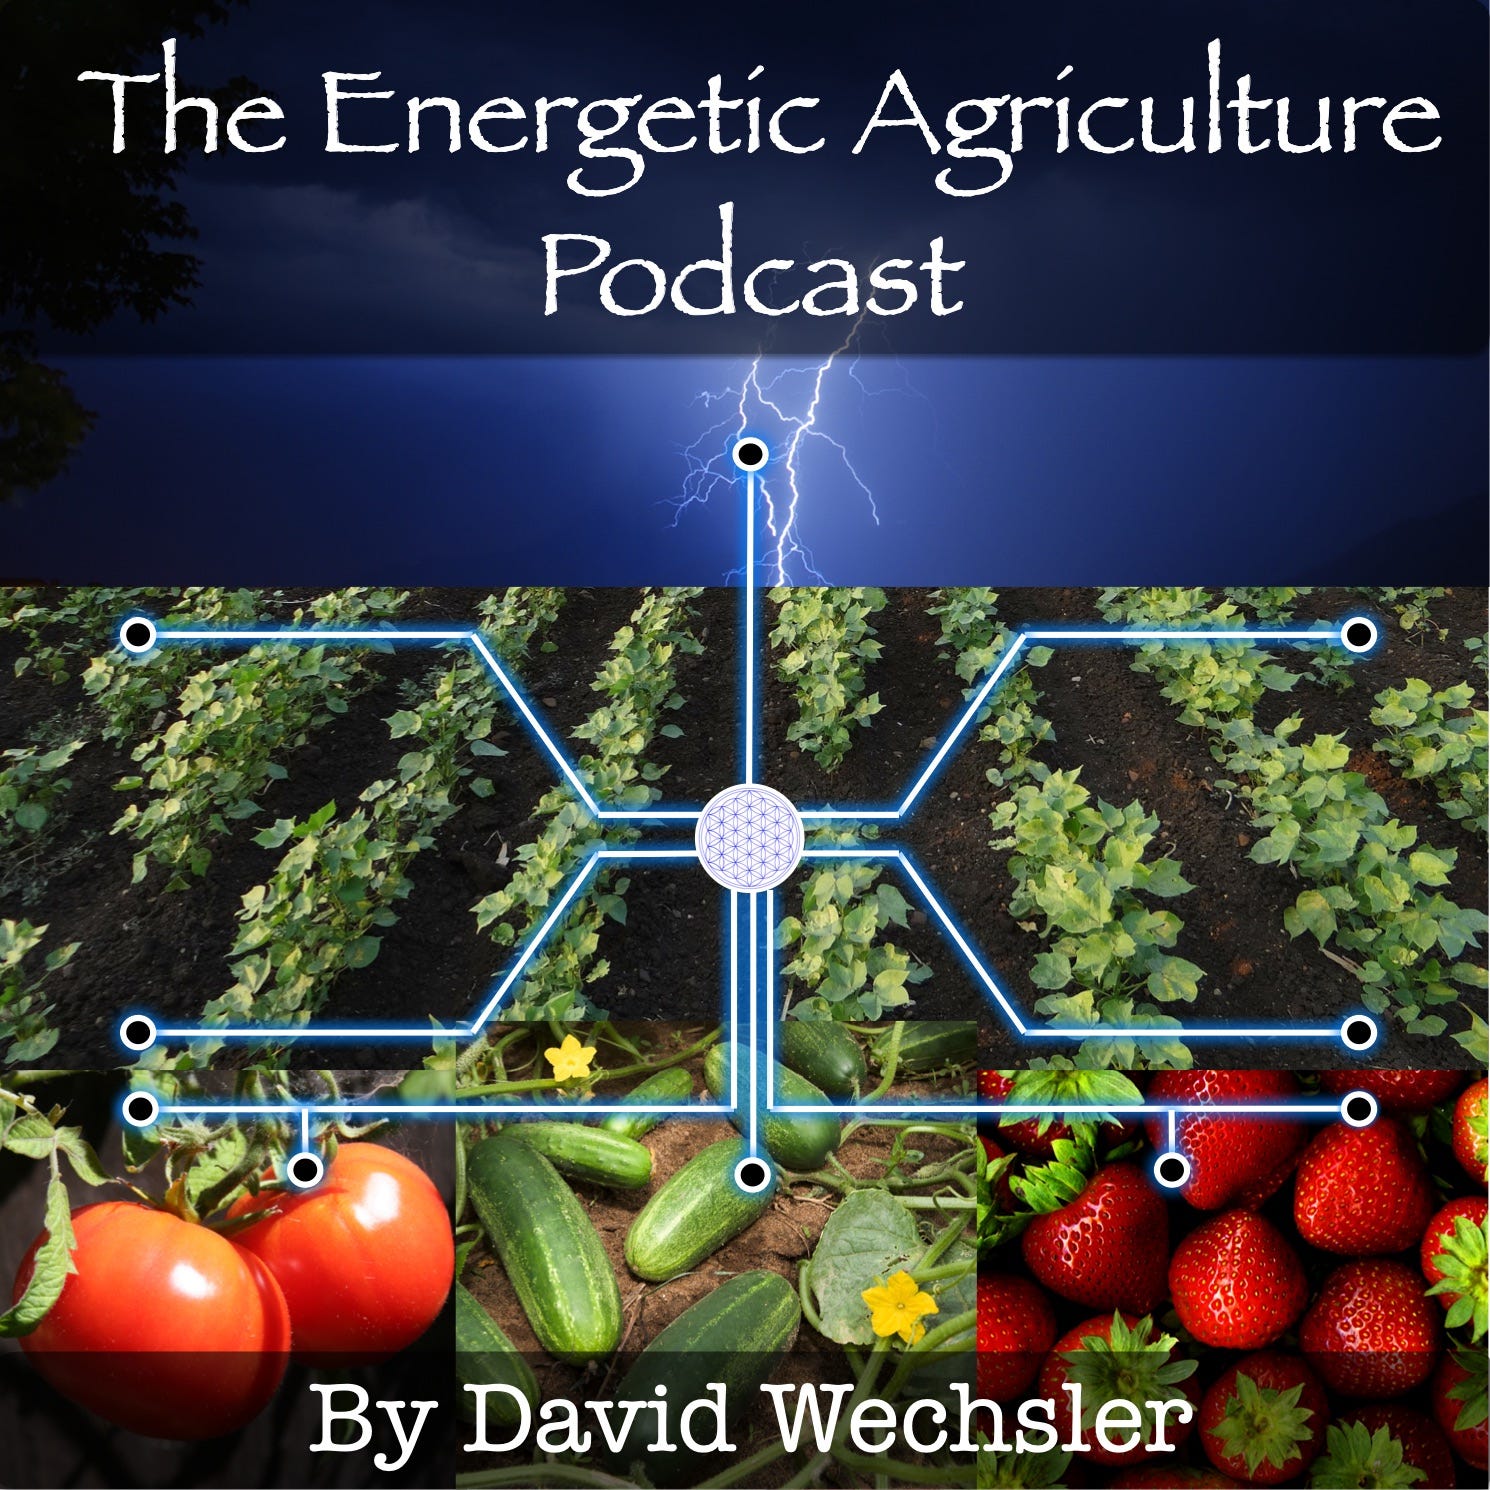 Introduction to Energetic Agriculture